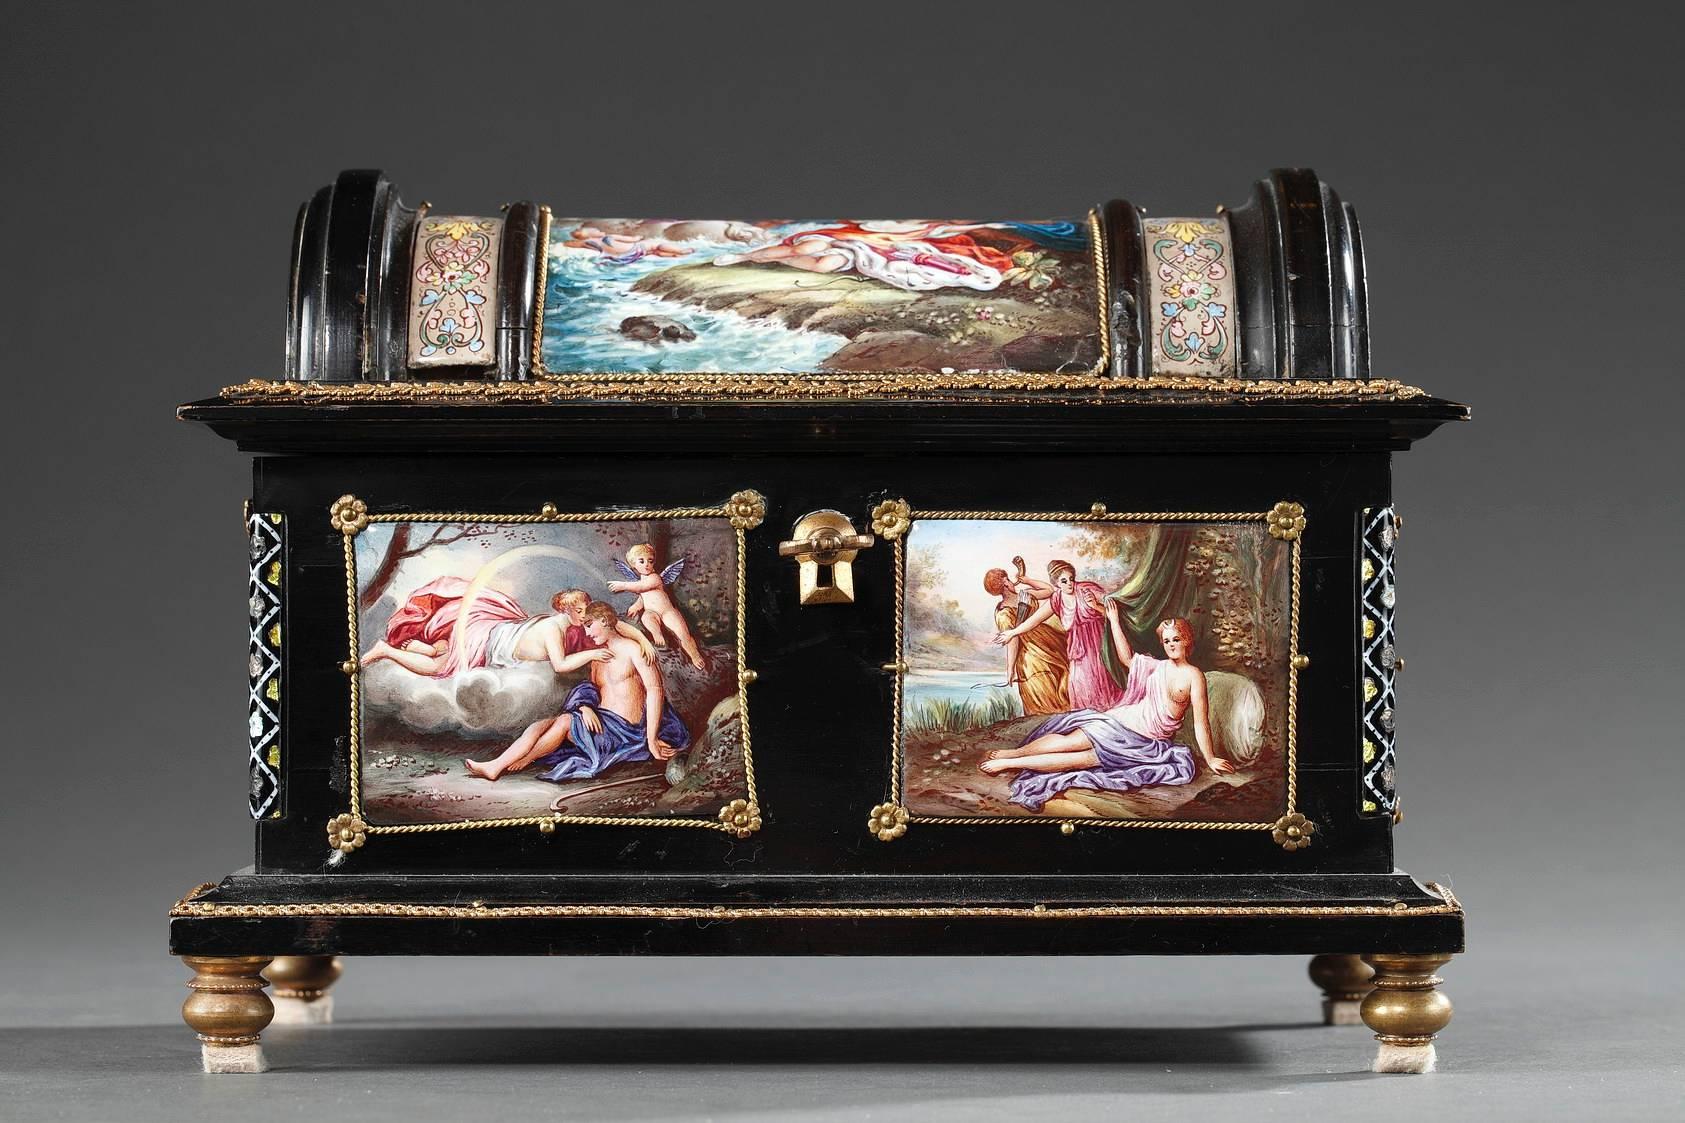 French Enamel Coffer with Mythological Scenes Signed Klein in Paris, 19th Century